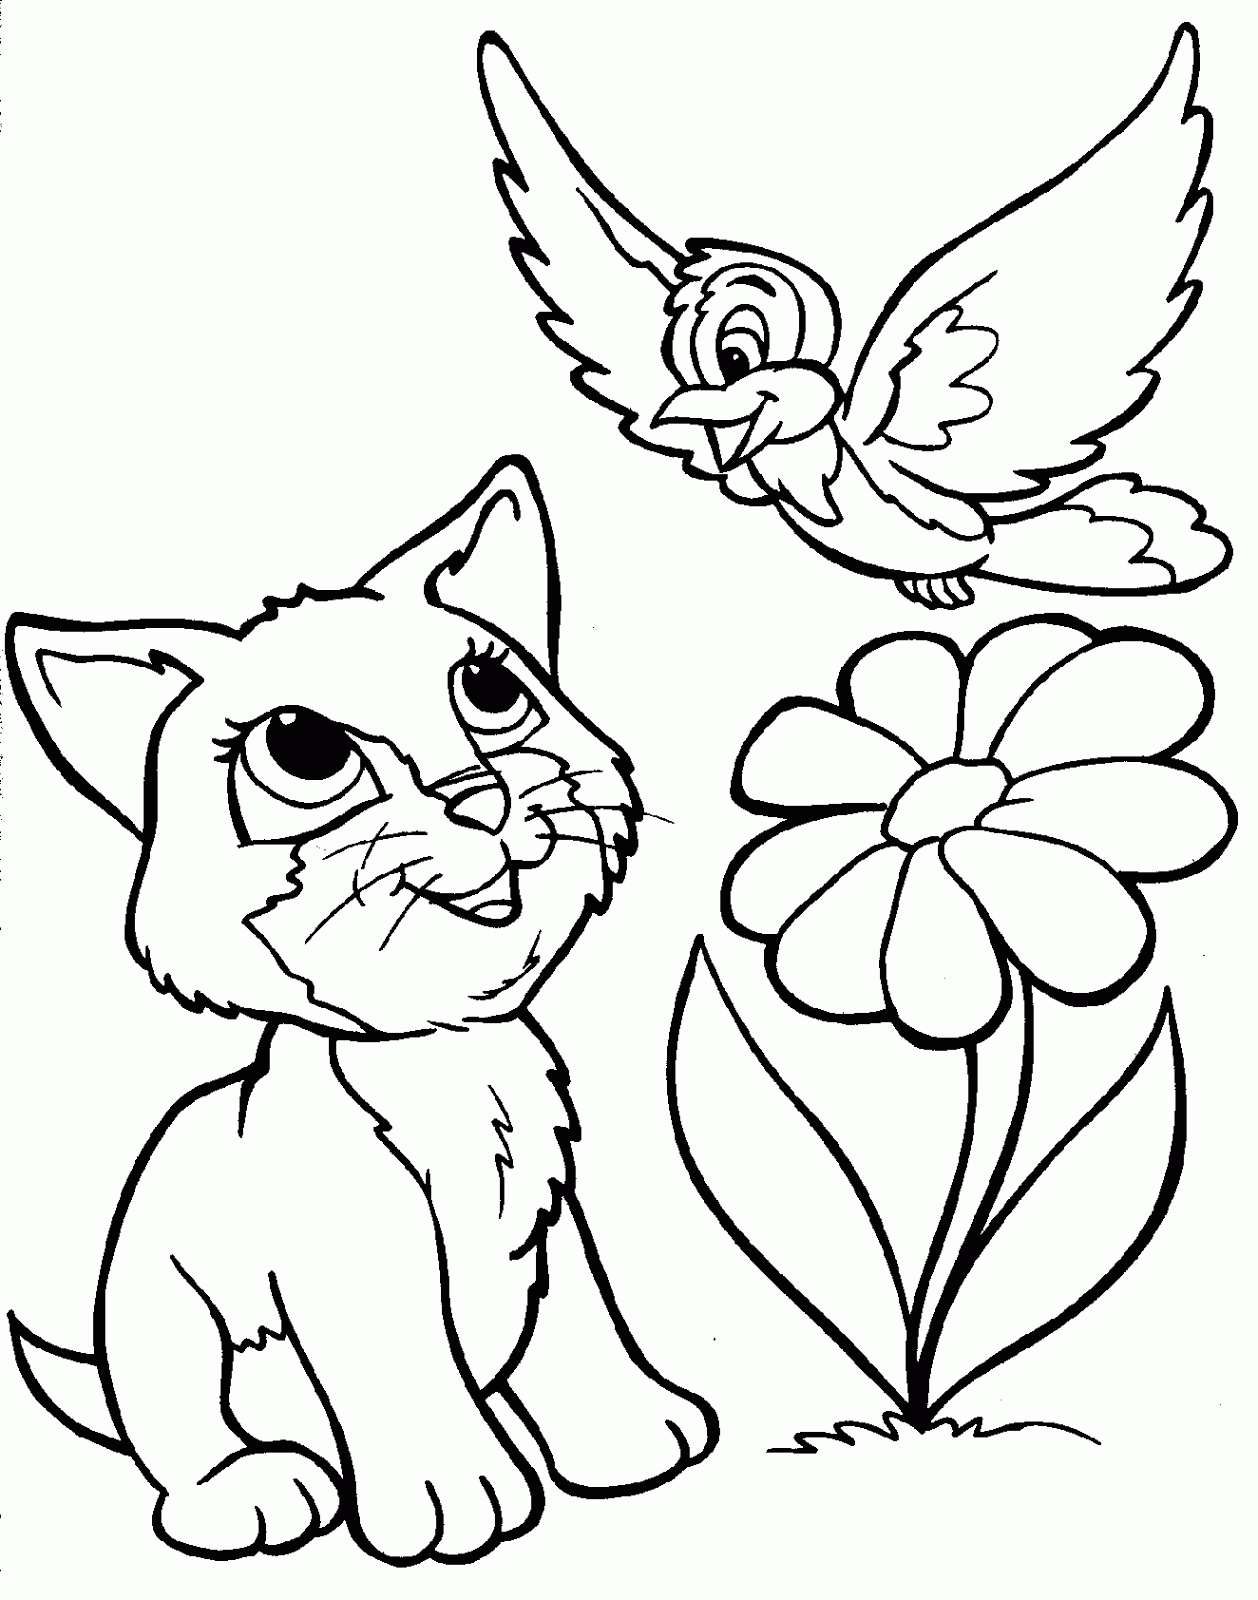 Free Coloring Pages For Kids - Displaypix